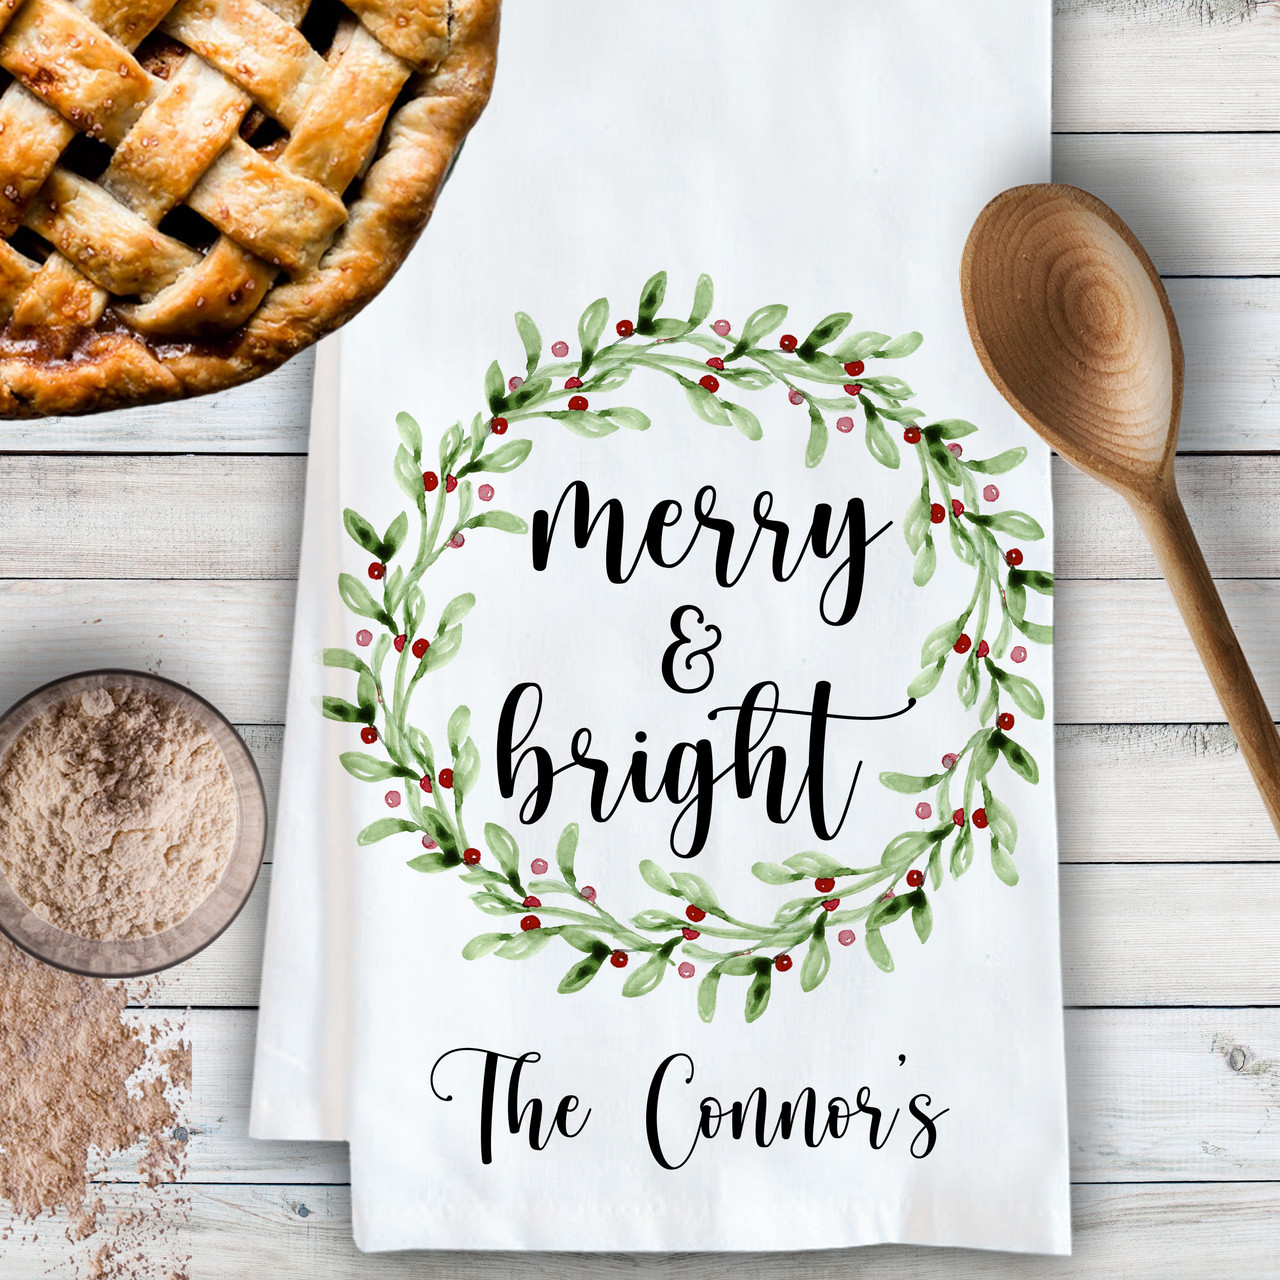 https://cdn11.bigcommerce.com/s-5grzuu6/images/stencil/1280x1280/products/5828/43150/Watercolor-Mistletoe-Merry-and-Bright-Christmas_Kitchen-Towel__40854.1633735843.jpg?c=2